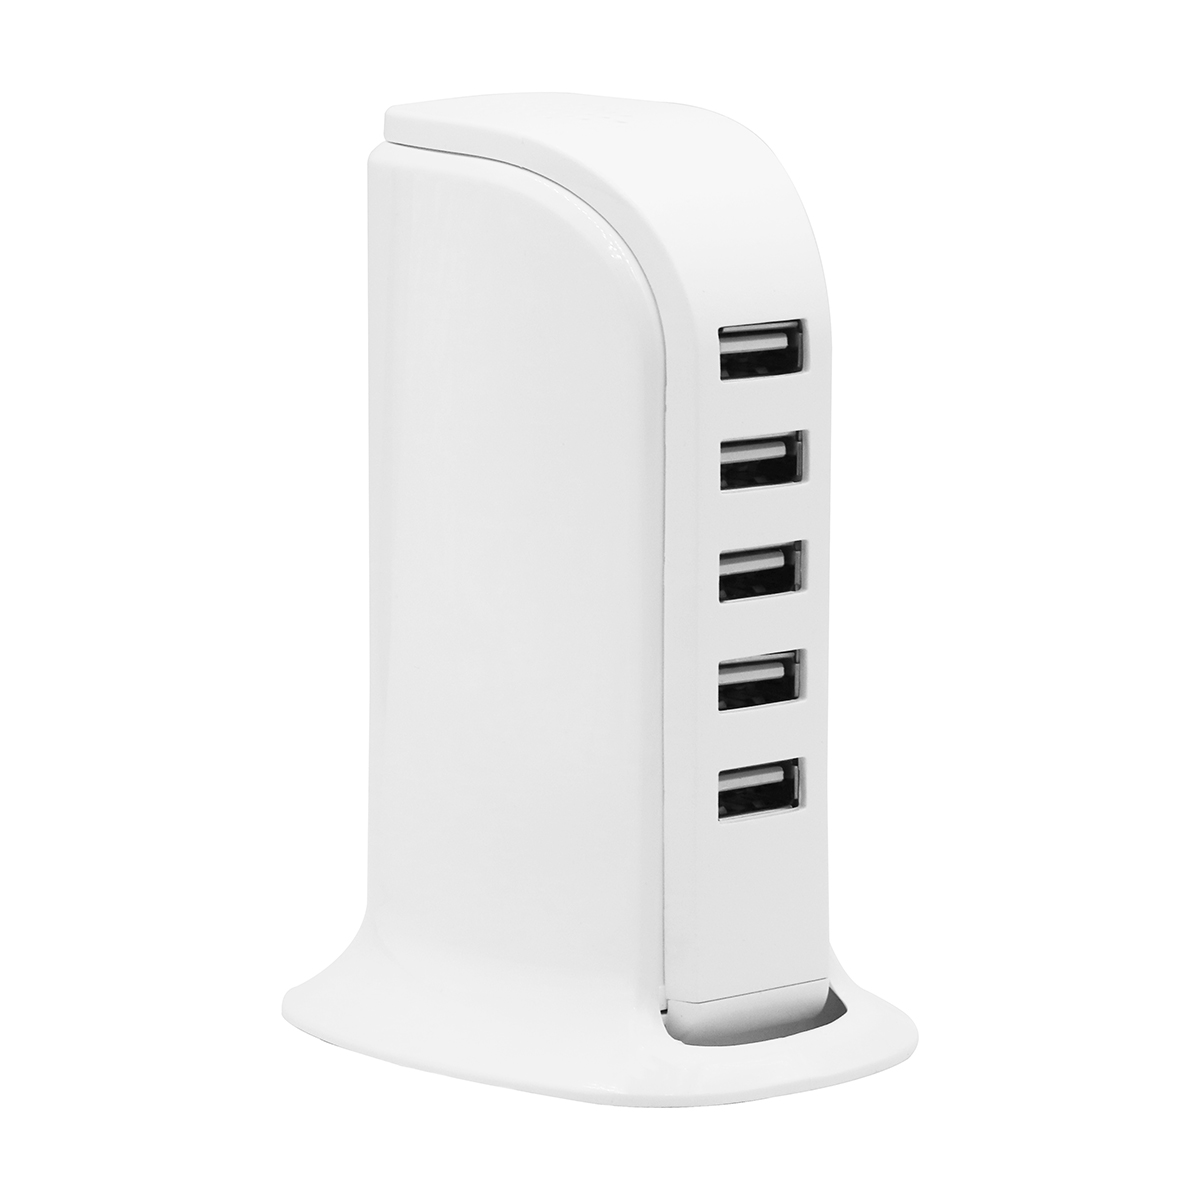 5. LM-J32 30W 5 USB Port Charger Station Bulk Purchase and Corporate purchase from China Union Power -Description-